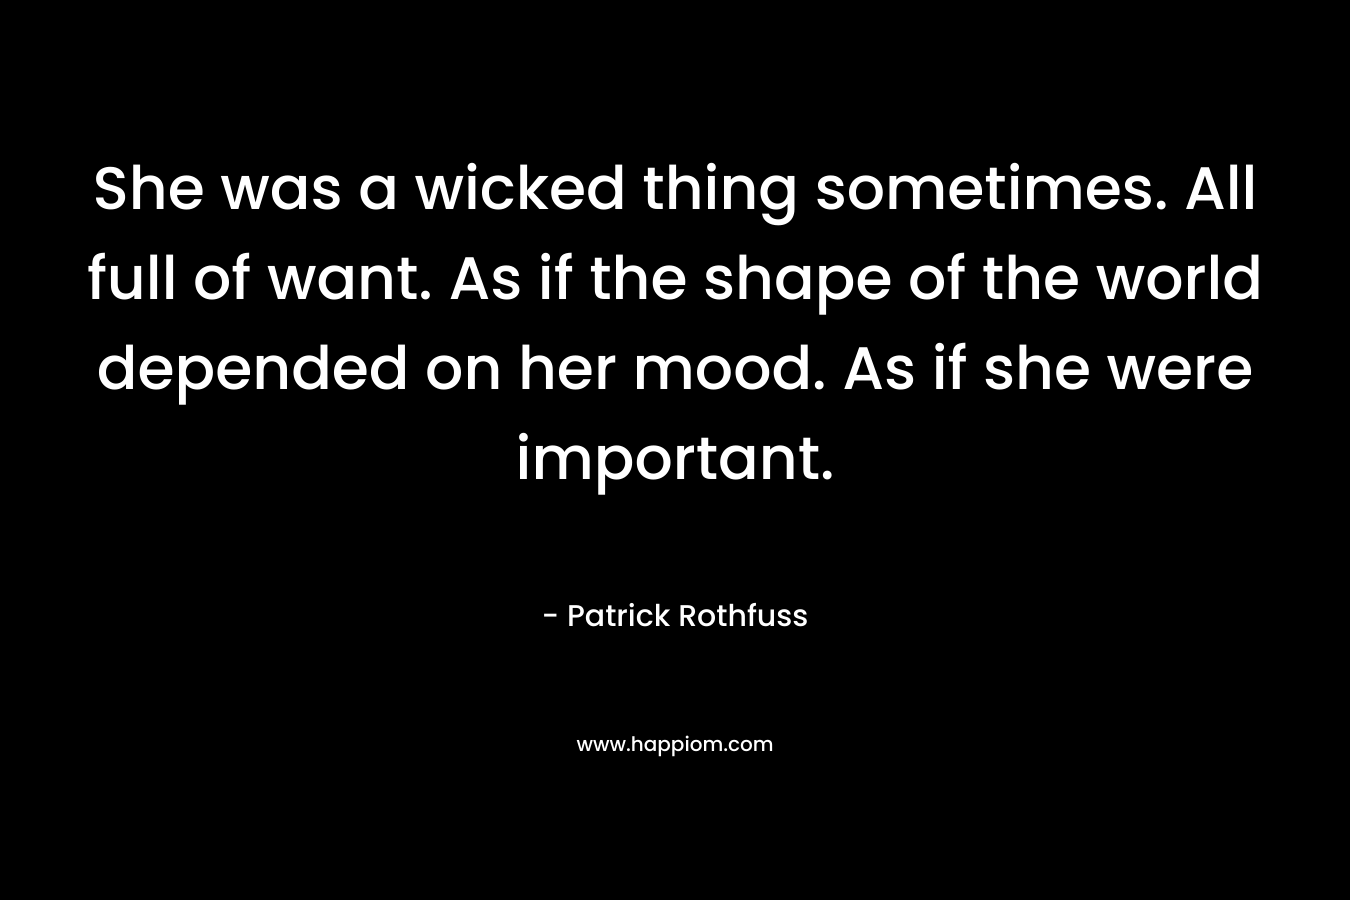 She was a wicked thing sometimes. All full of want. As if the shape of the world depended on her mood. As if she were important. – Patrick Rothfuss